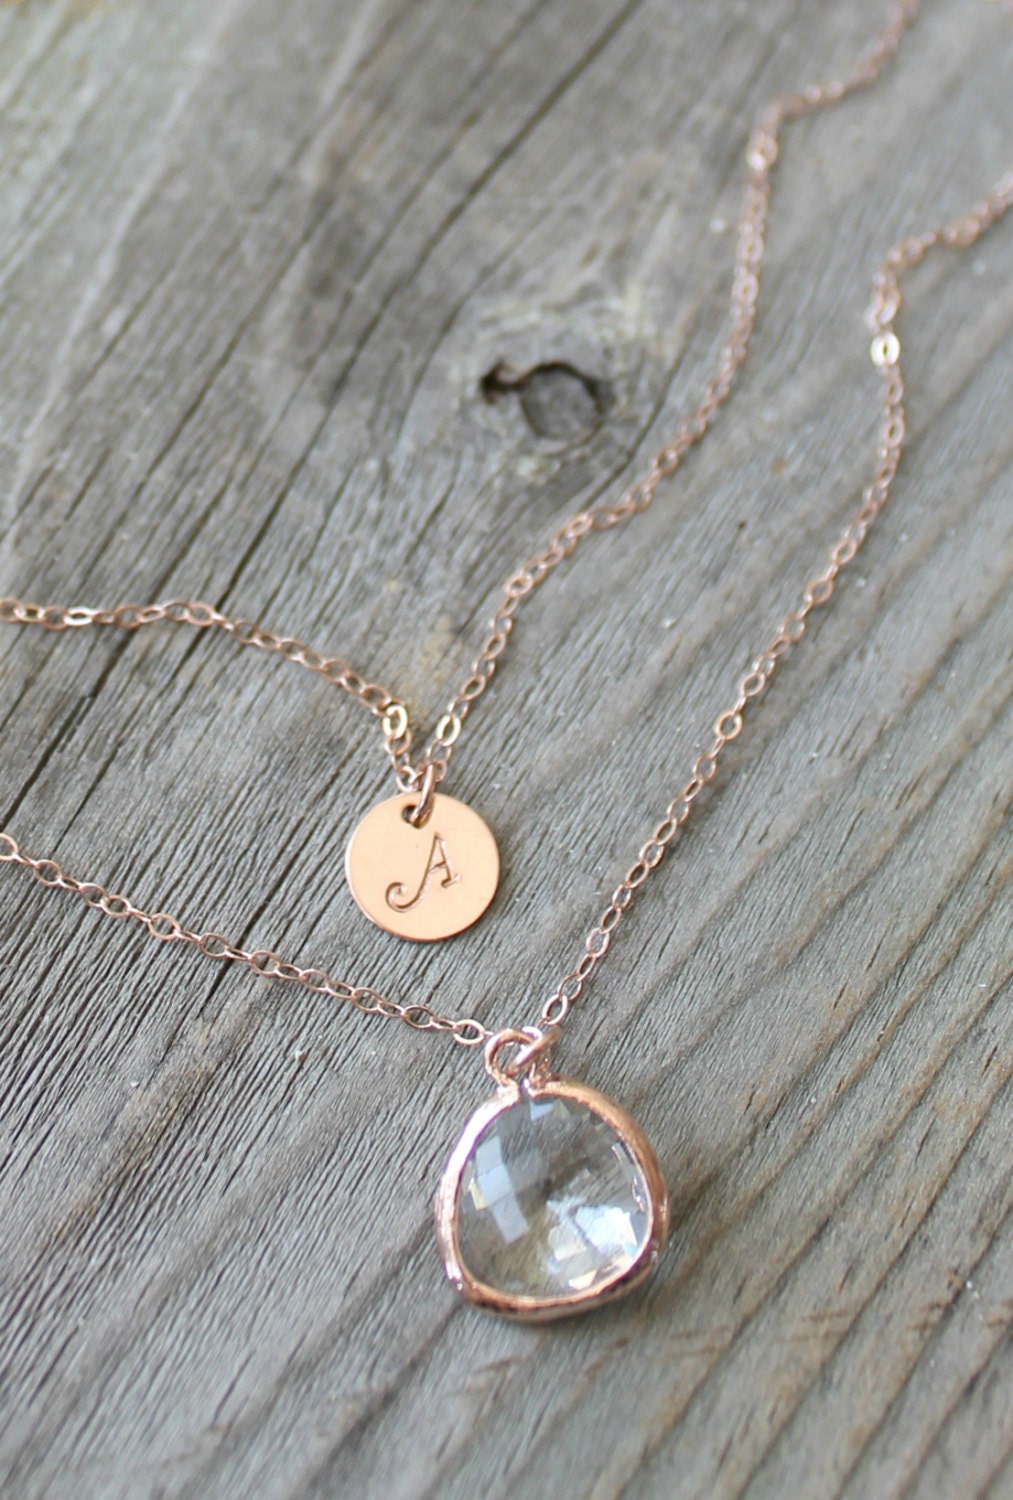 14k Rose gold filled Layered Initial Necklace faceted crystal